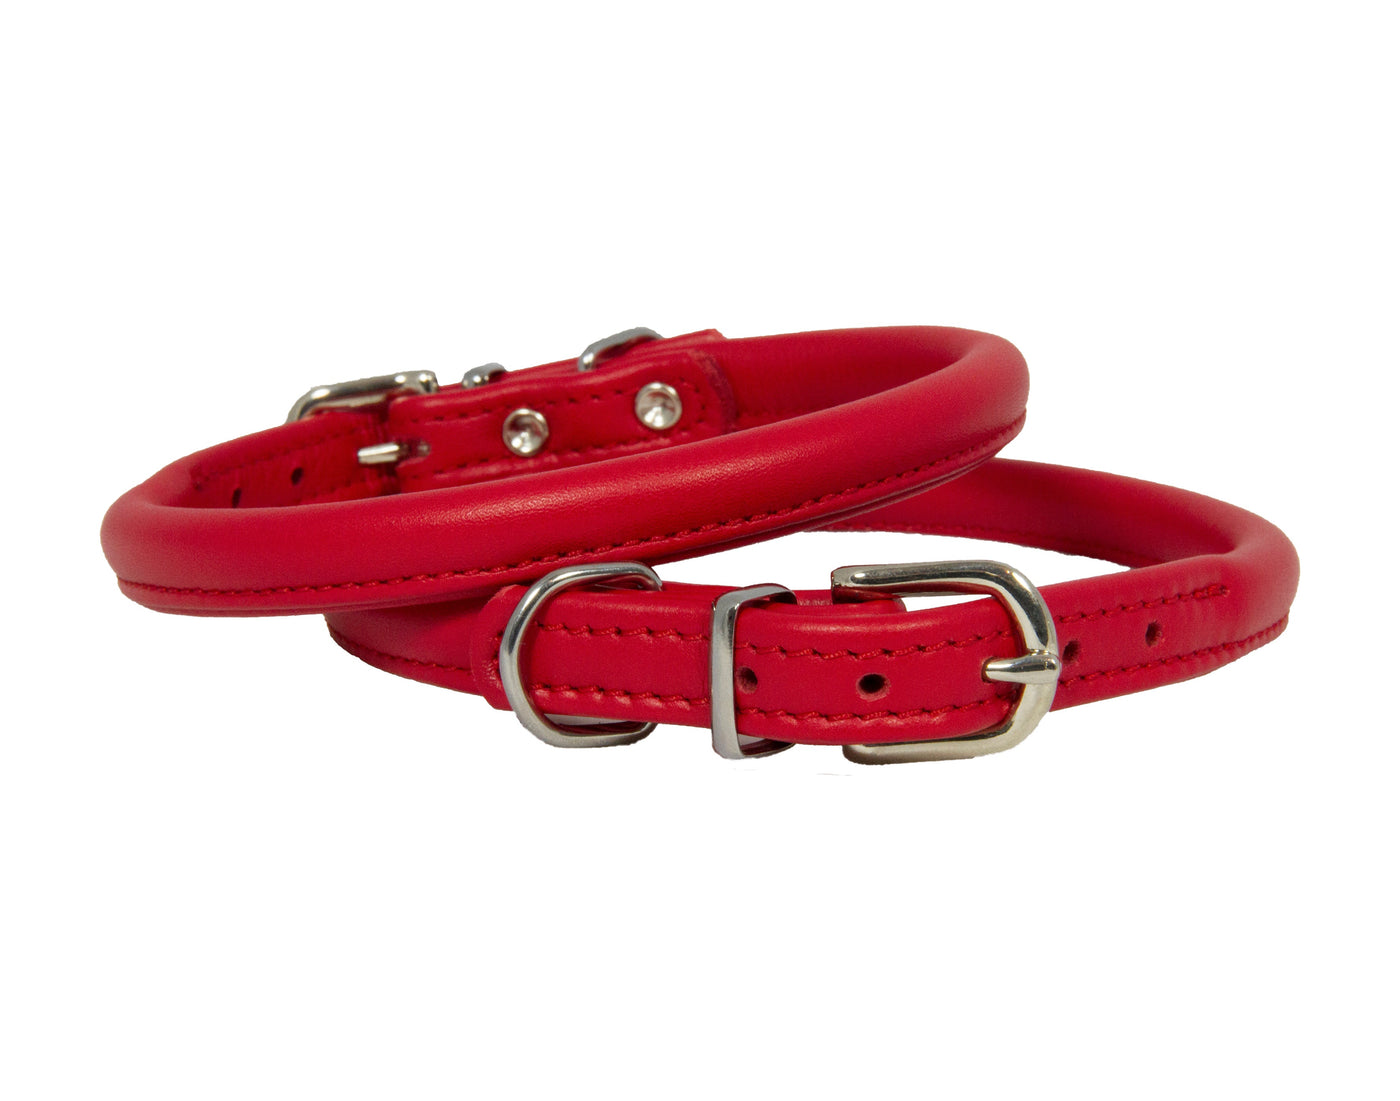 Red rolled leather dog collar 